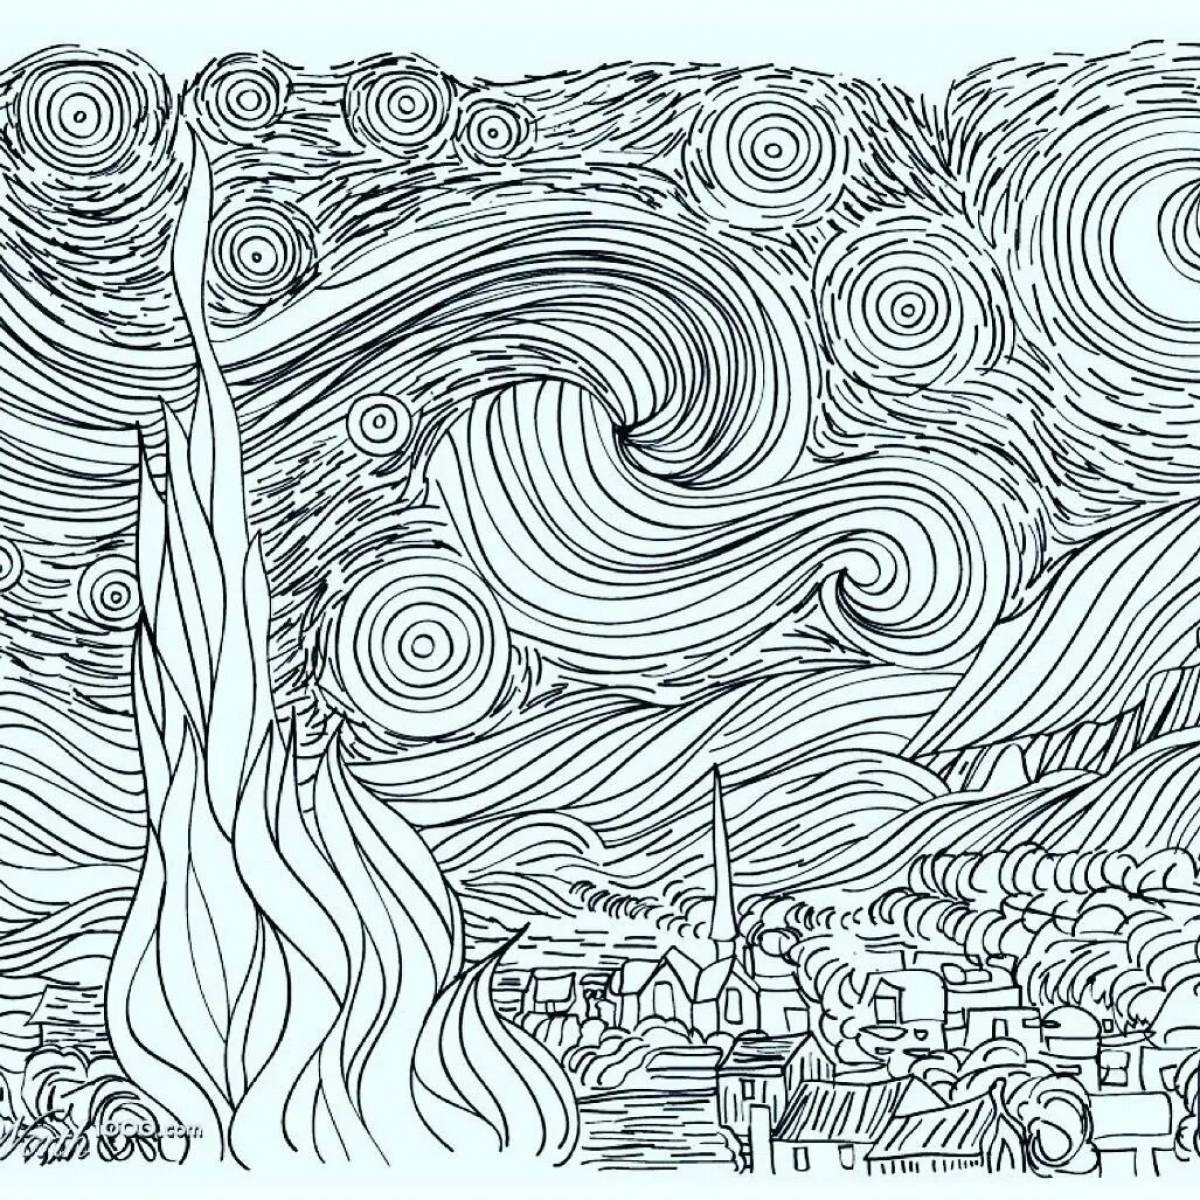 Fancy starry night coloring book